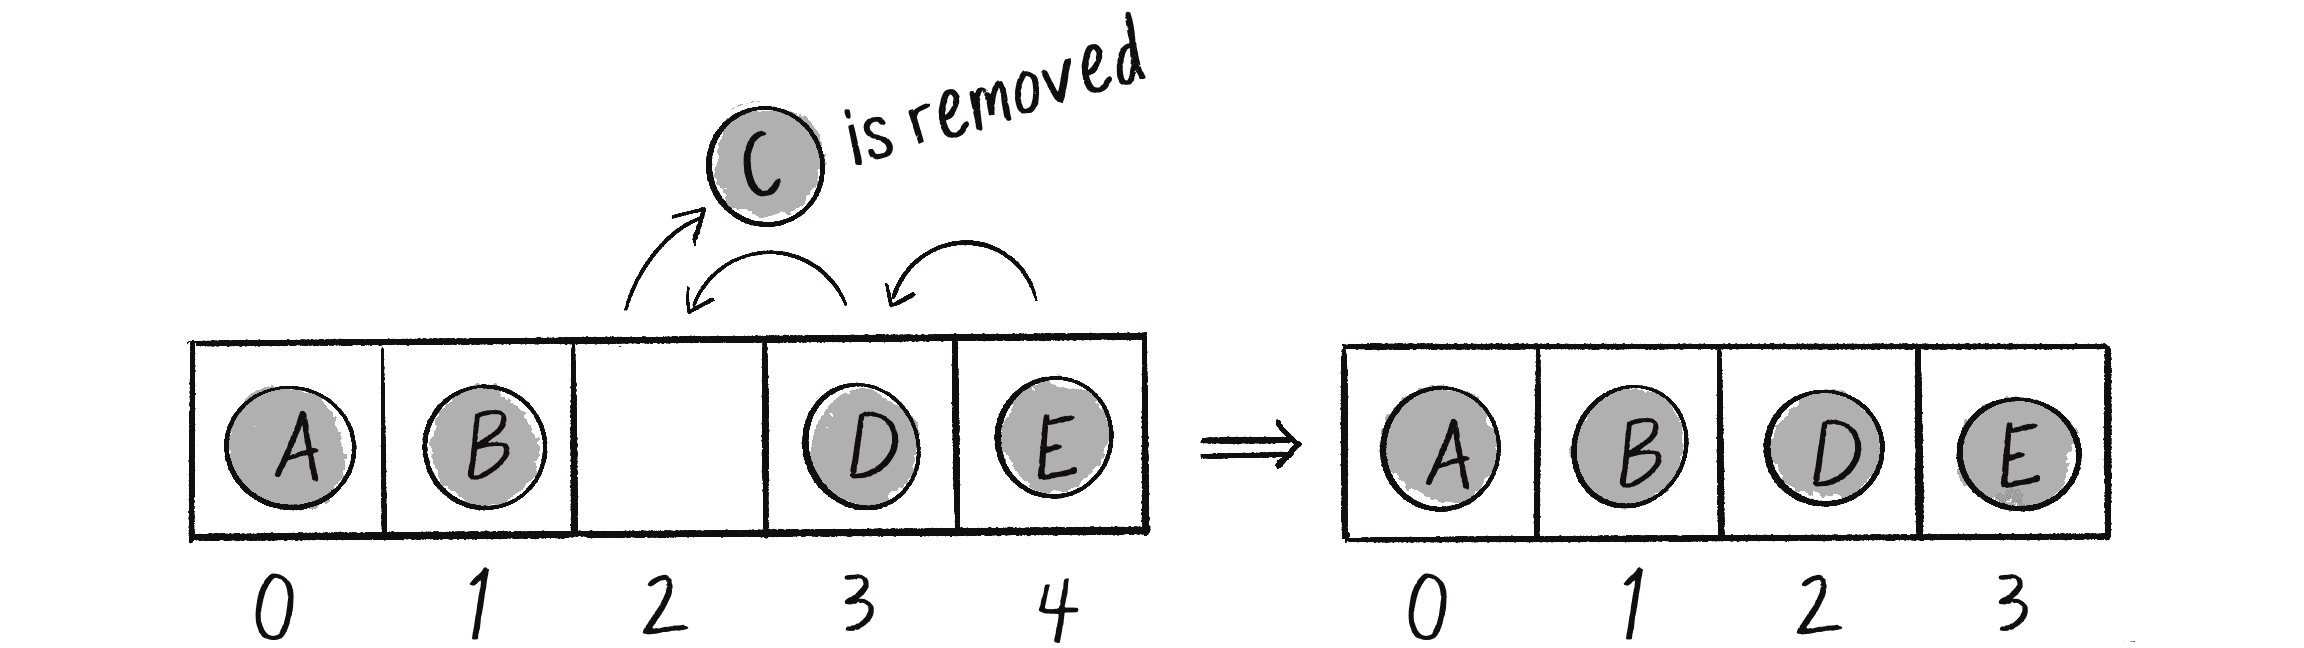 Figure 4.1: When an element is removed from an array, the subsequent elements shift to the left to fill the empty spot.